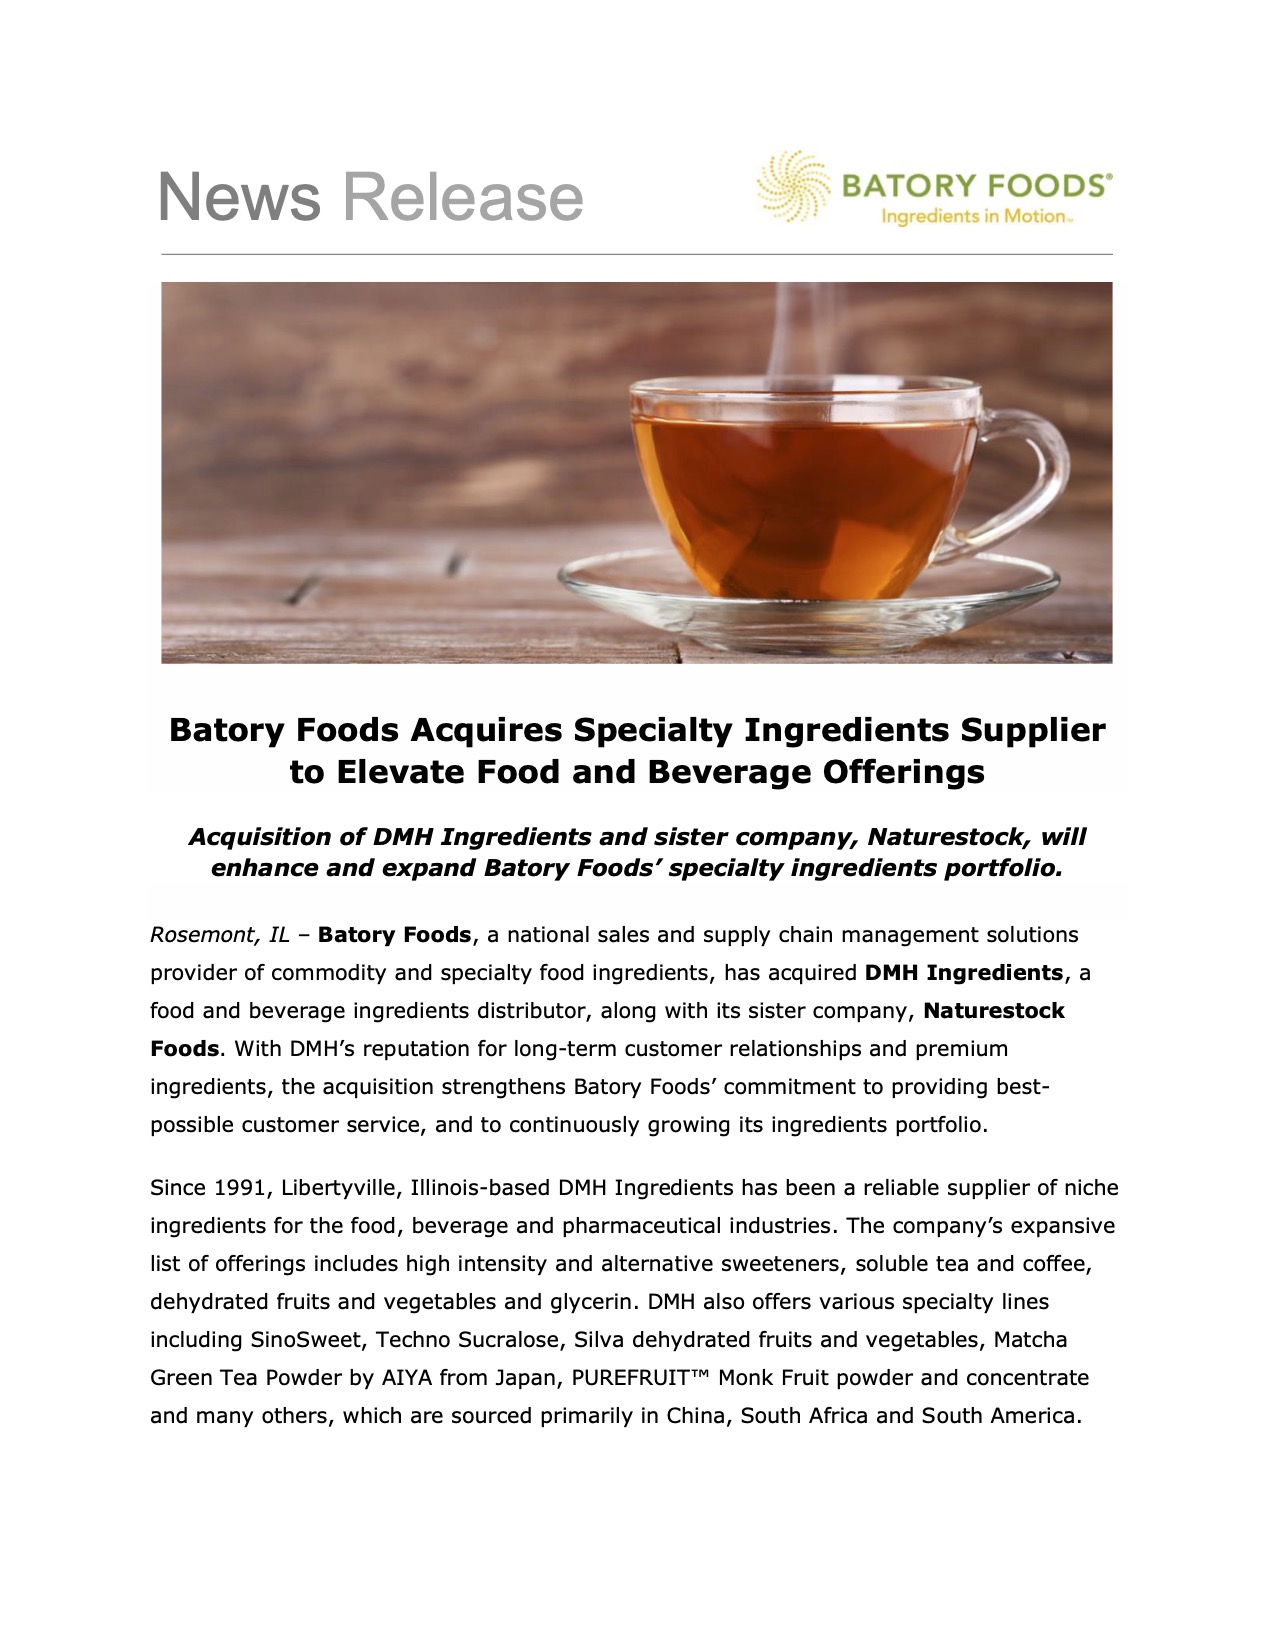 Batory Foods Acquires DMH Ingredients_11.10.21